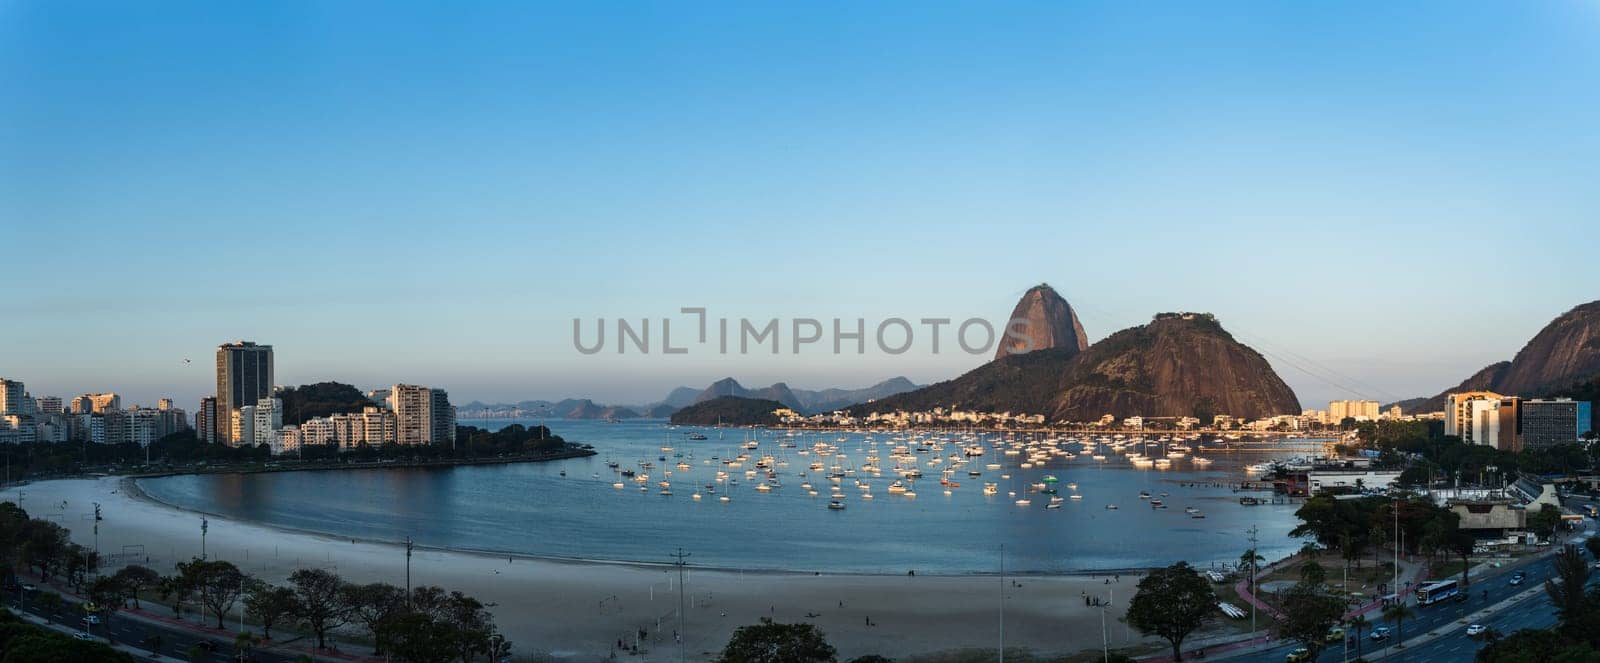 Beautiful dusk view of Botafogo, Rio de Janeiro, with highlights like Sugarloaf Mountain, Urca Hill, sailboat-filled bay and an empty beach. Ideal for text placement.